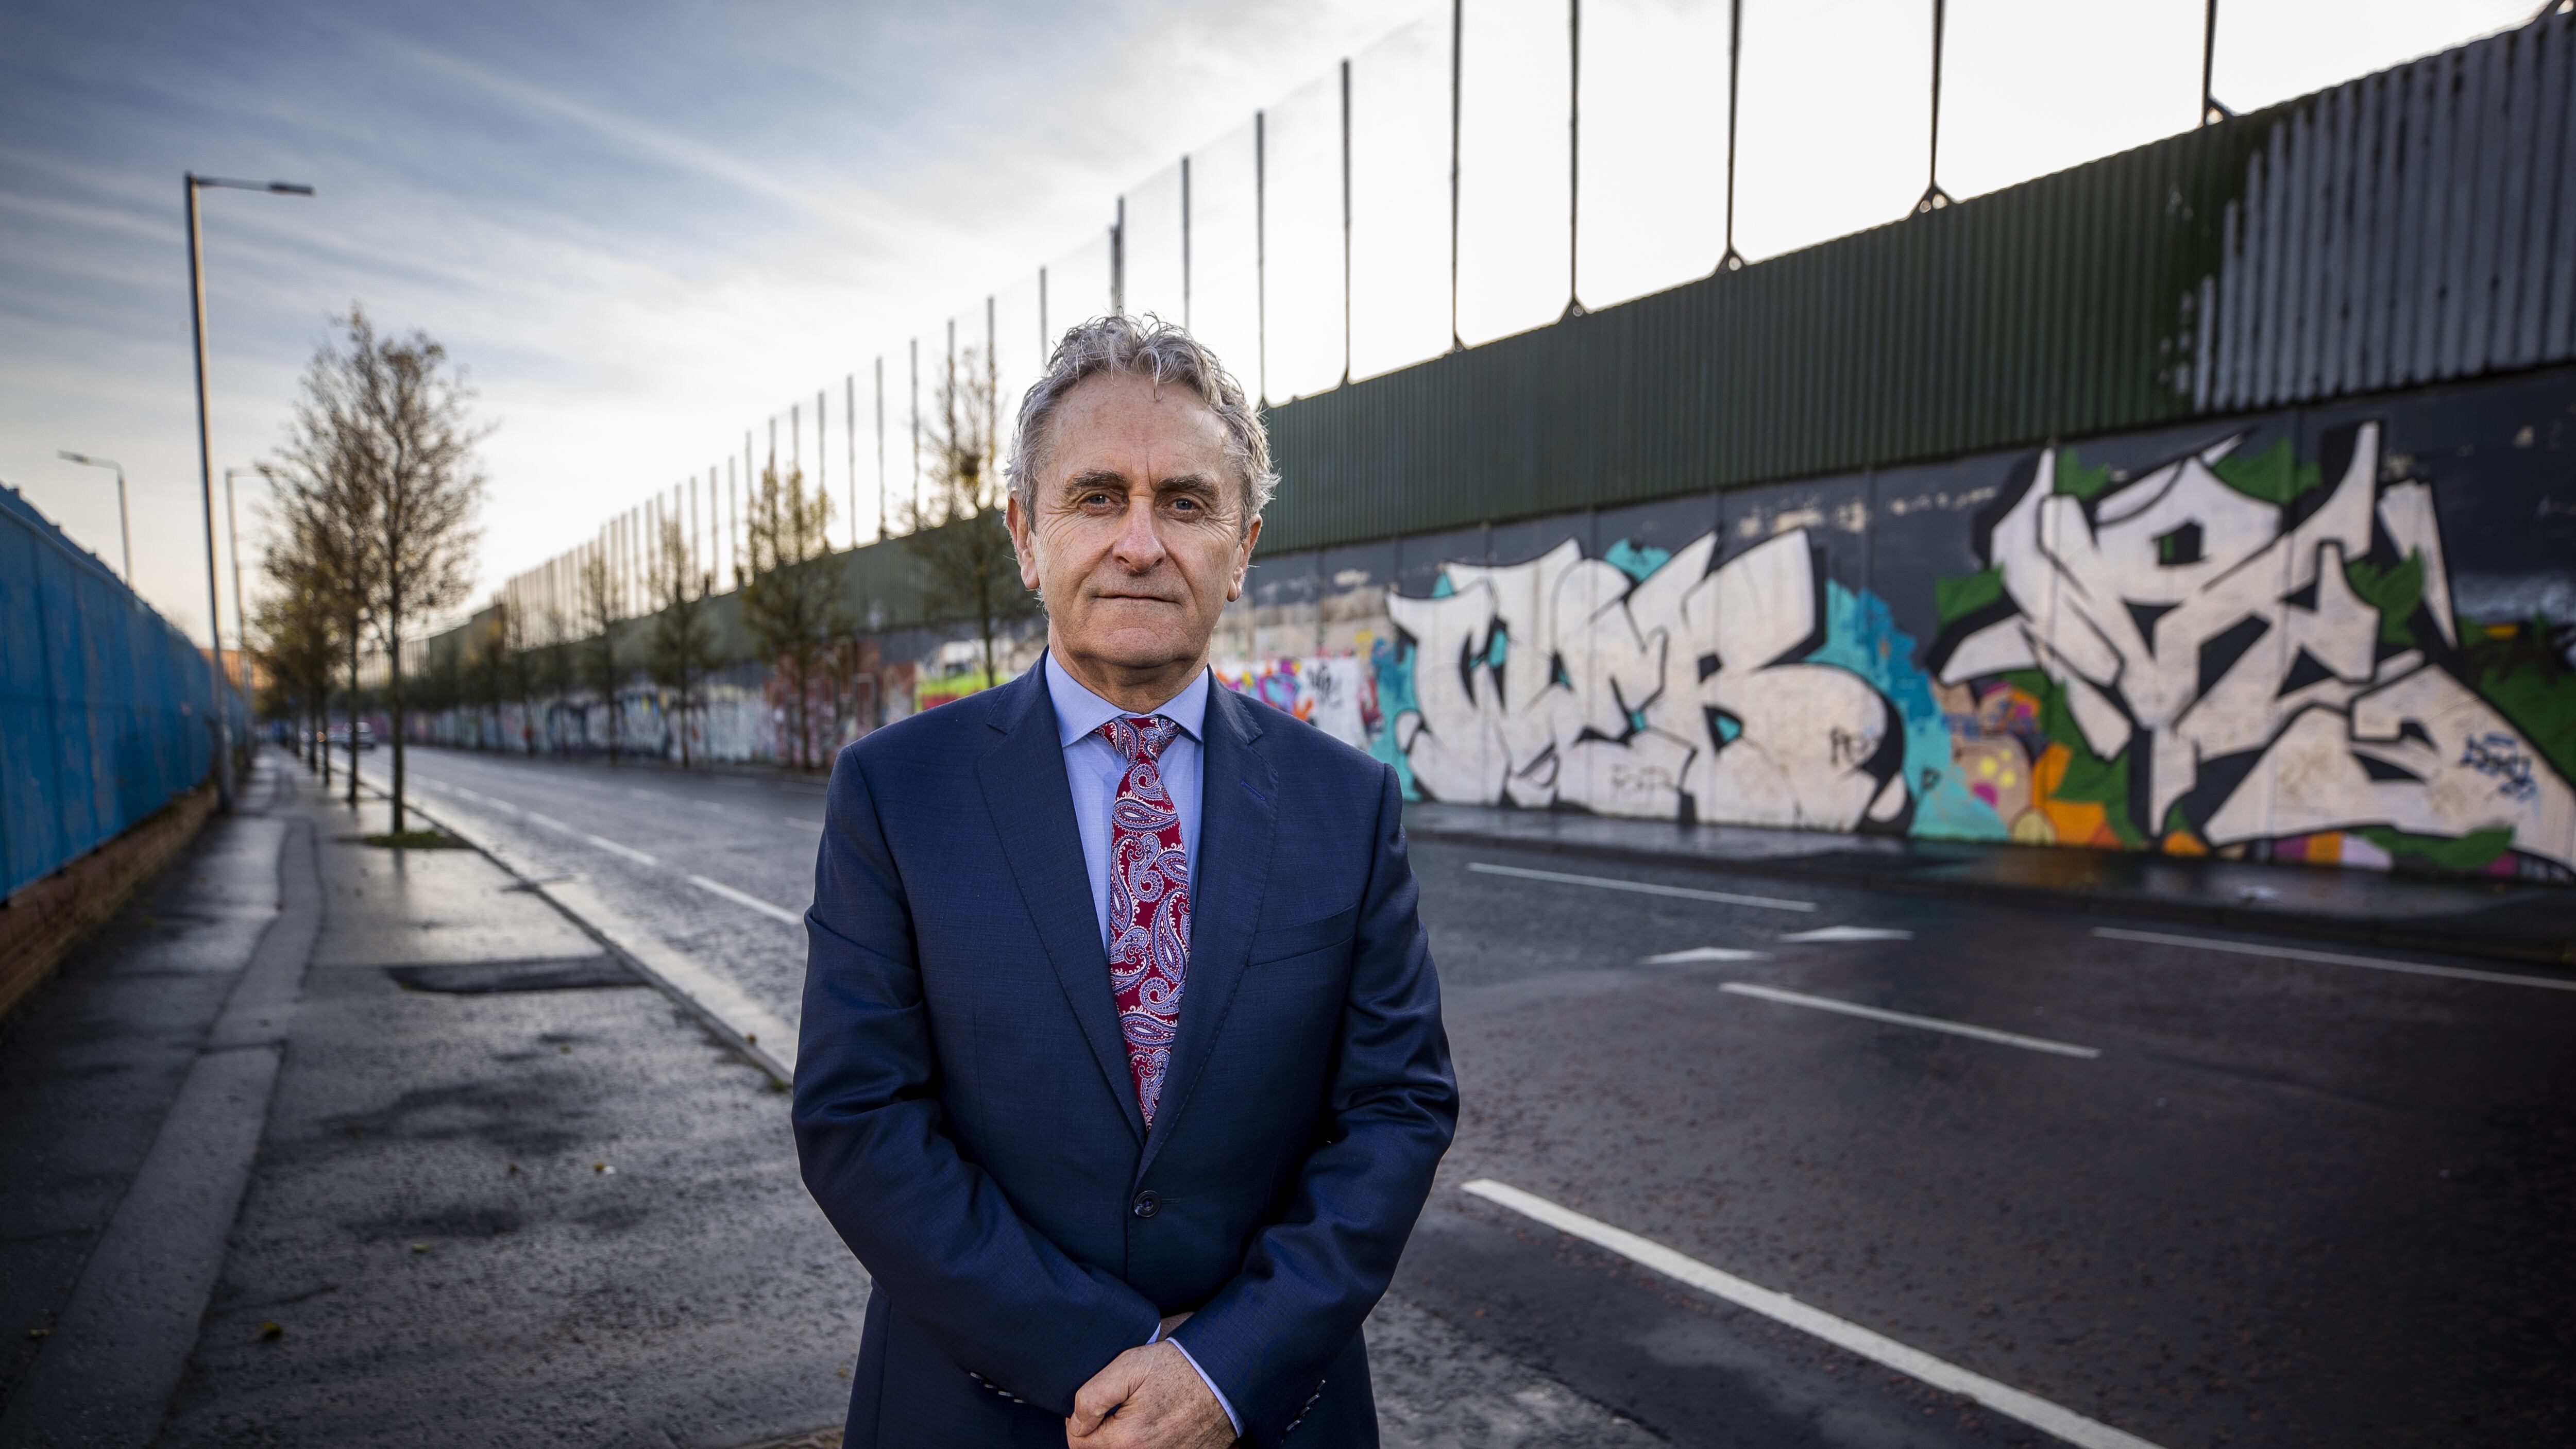 Paddy Harte, chairman of the Board of the International Fund for Ireland at Belfast’s Peace Walls